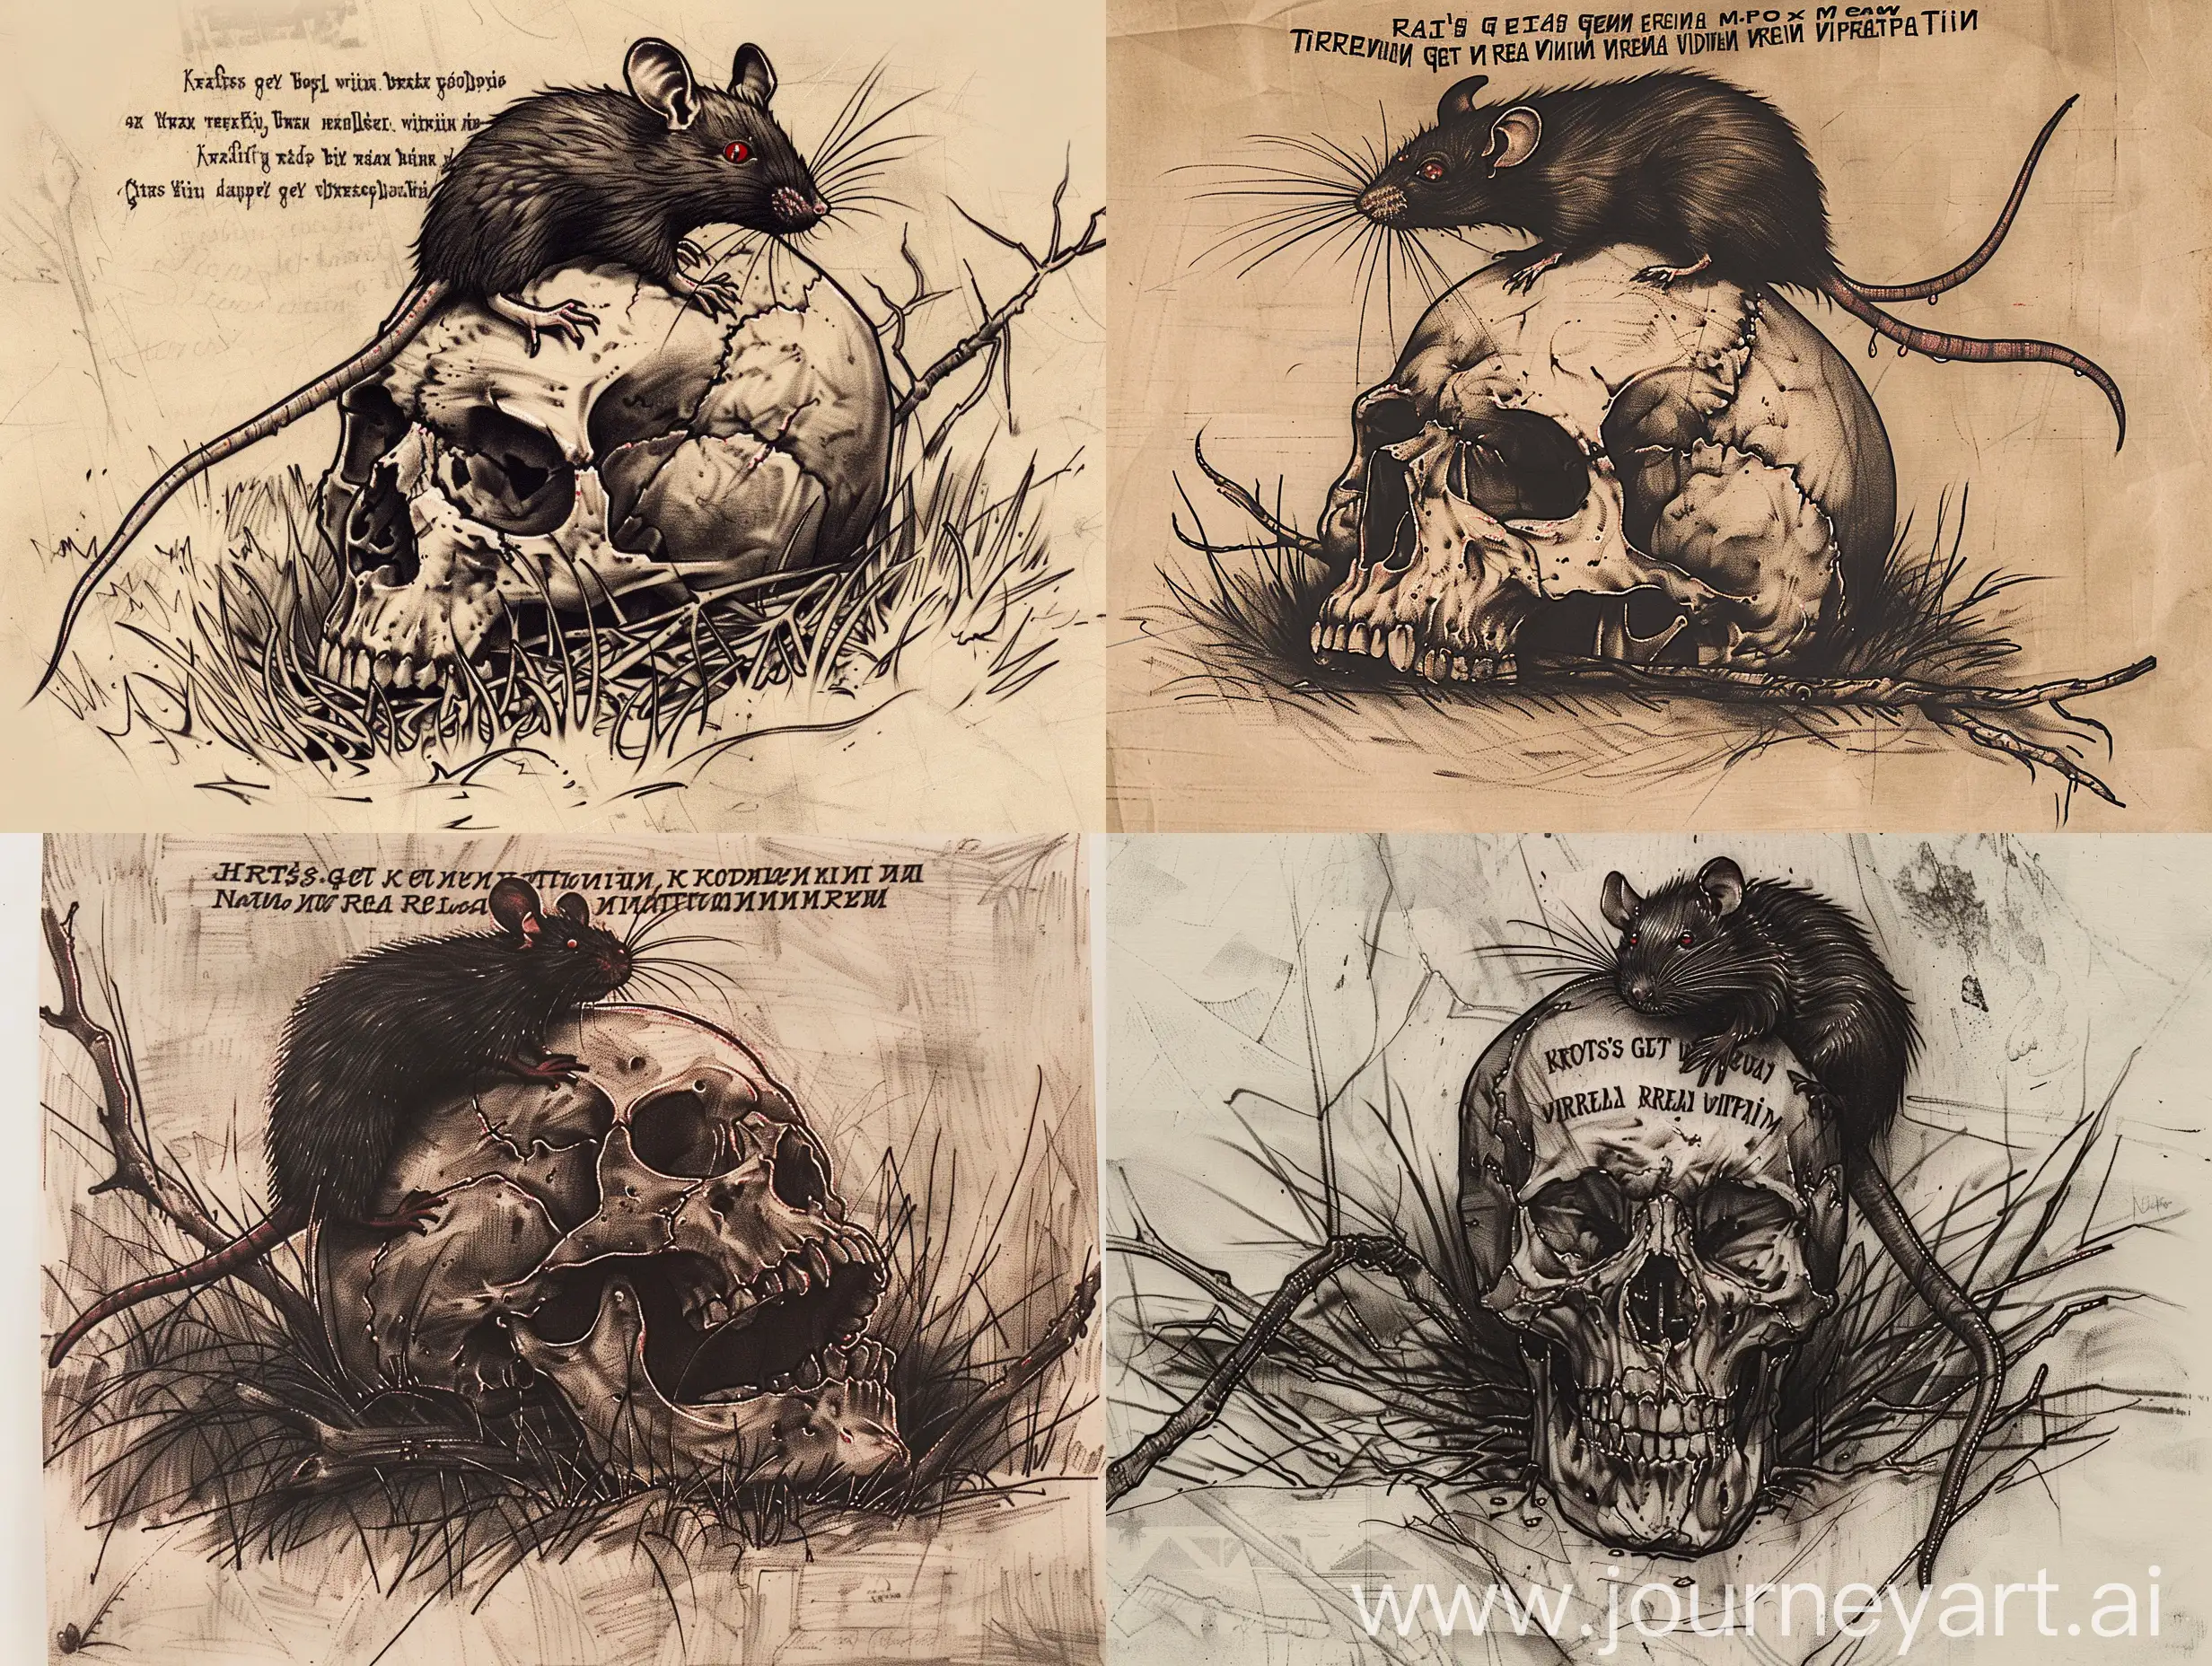 Eerie-Skull-Tattoo-Sketch-with-Rat-and-Foreboding-Inscription